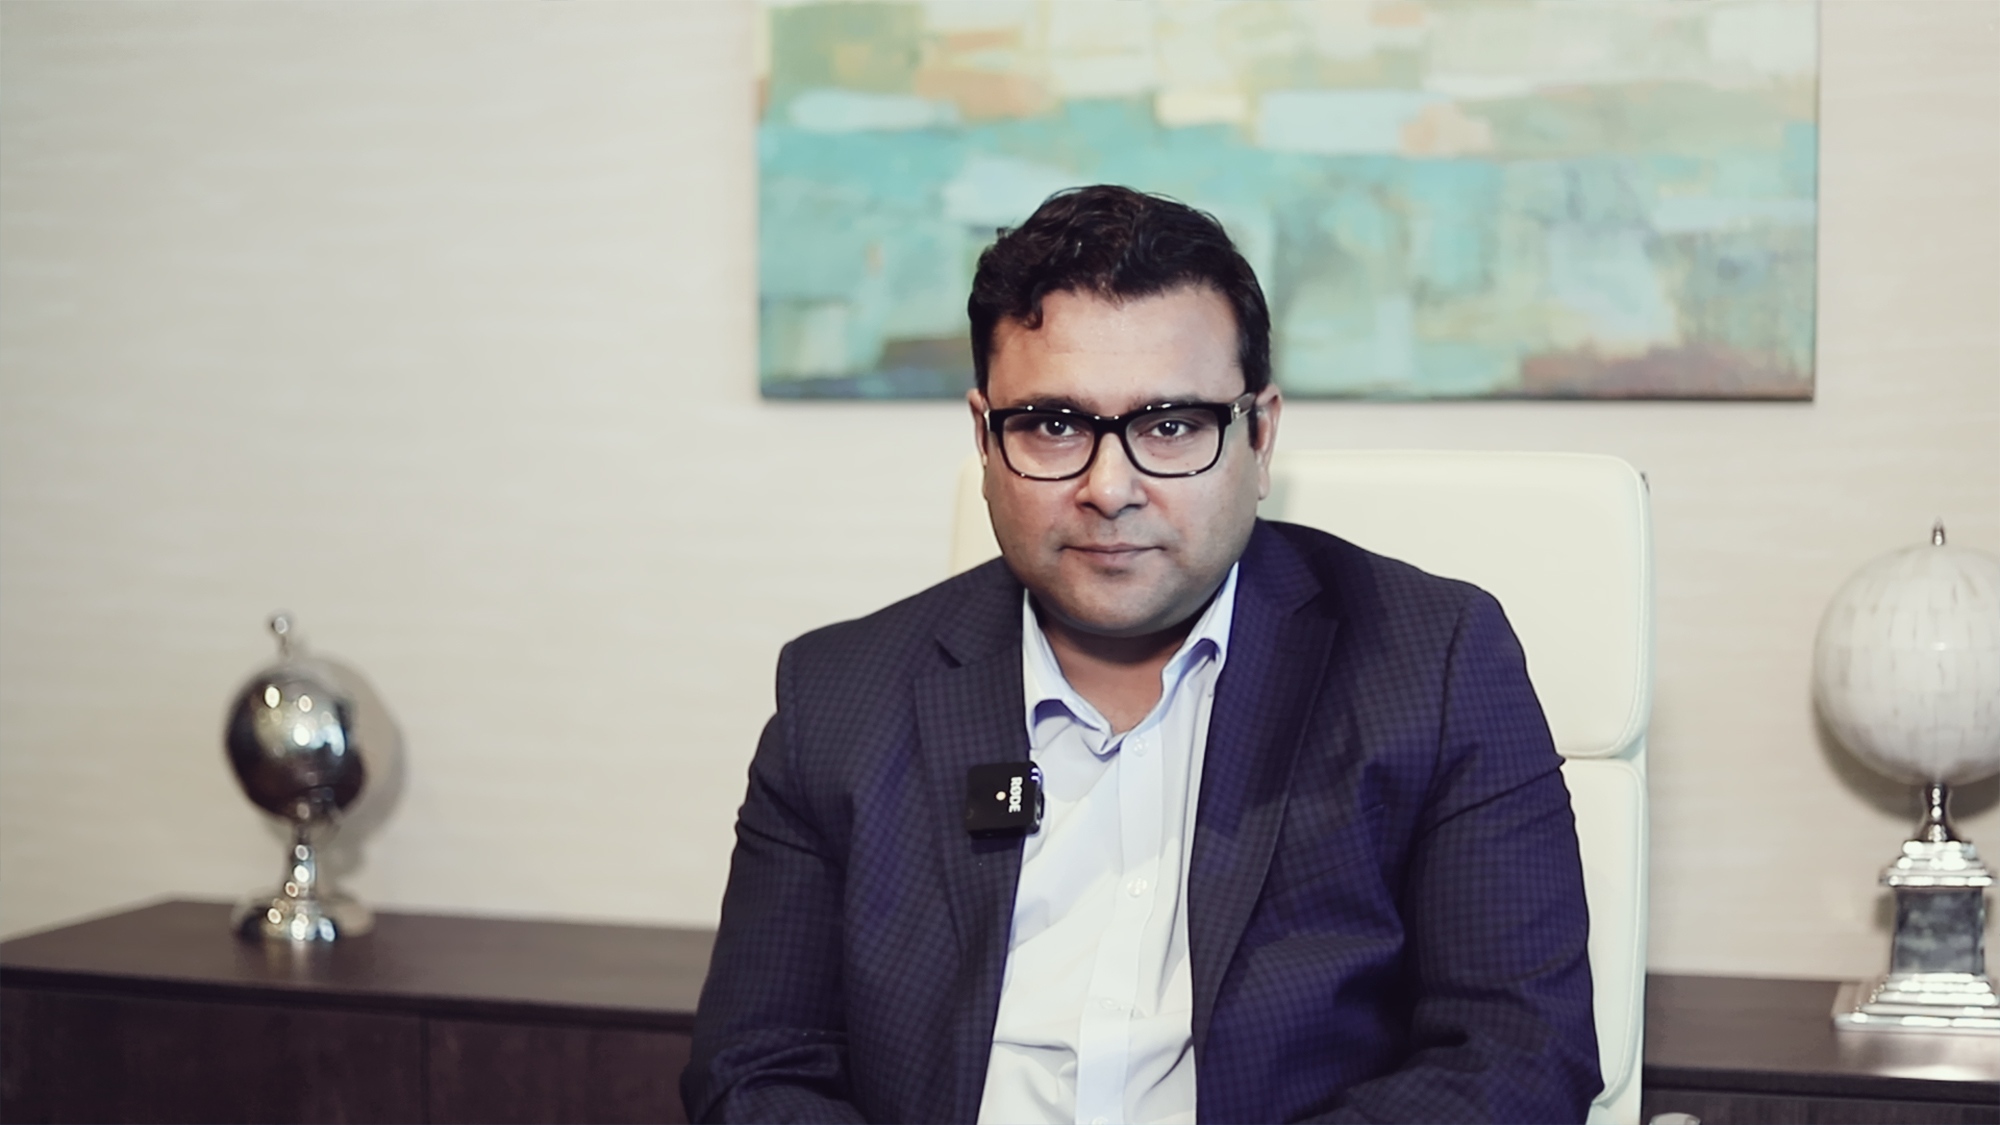 About ENACT: Interview with the CEO Deep Chakraborty